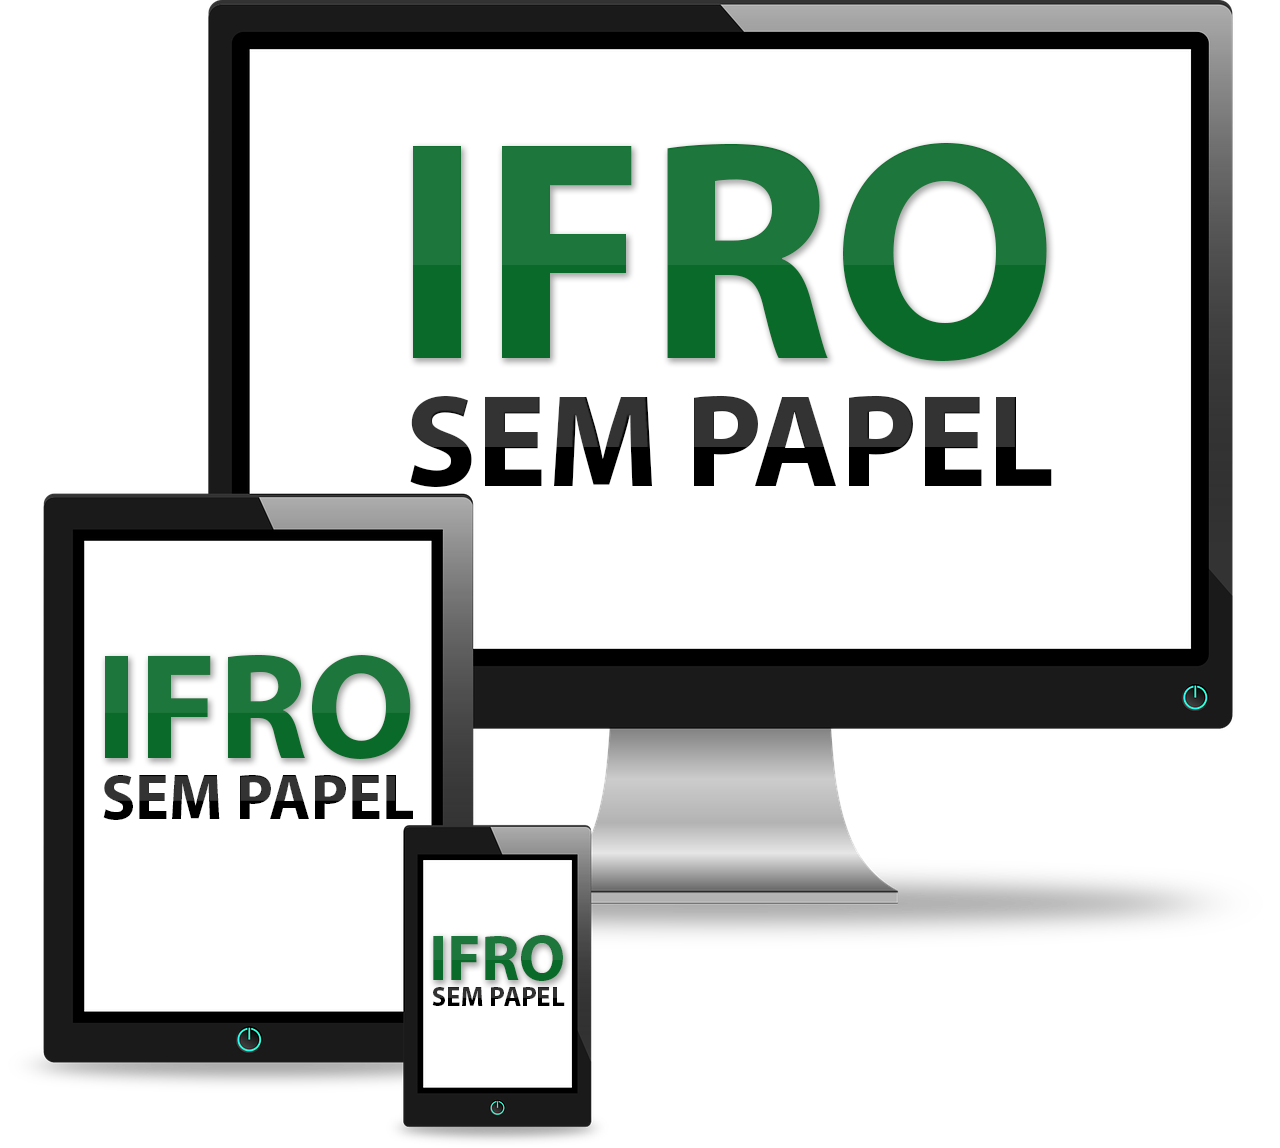 IFRO SEM PAPEL